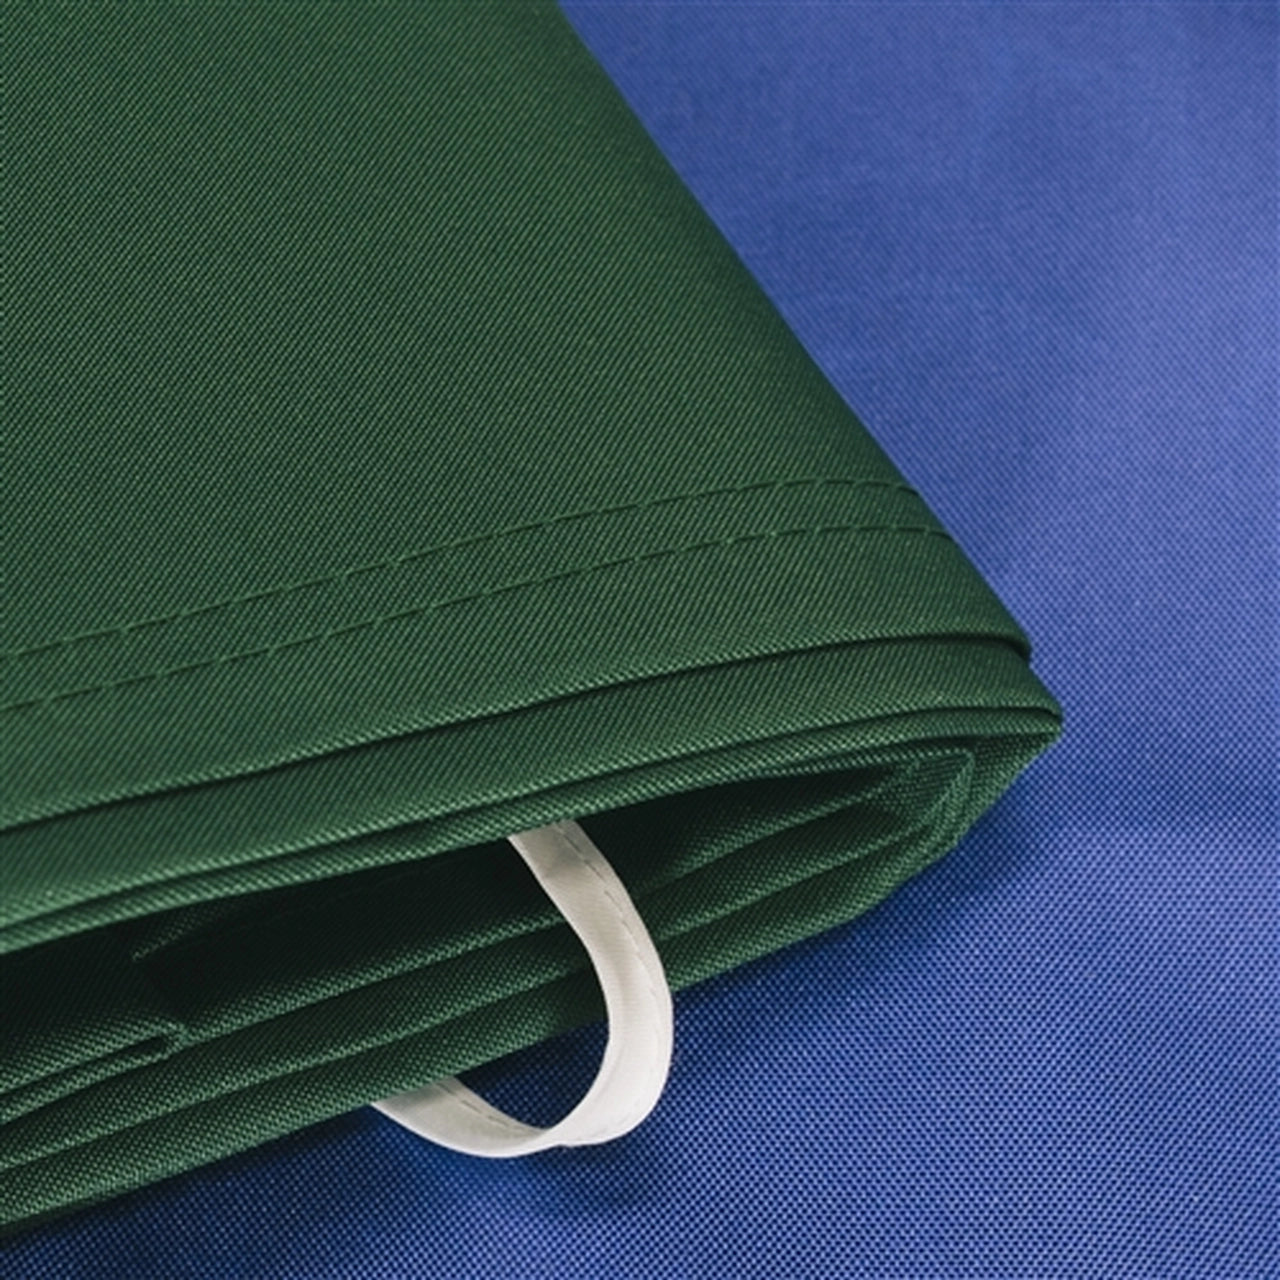 Aleko Protective Awning Cover - 12 x 10 Feet - Green